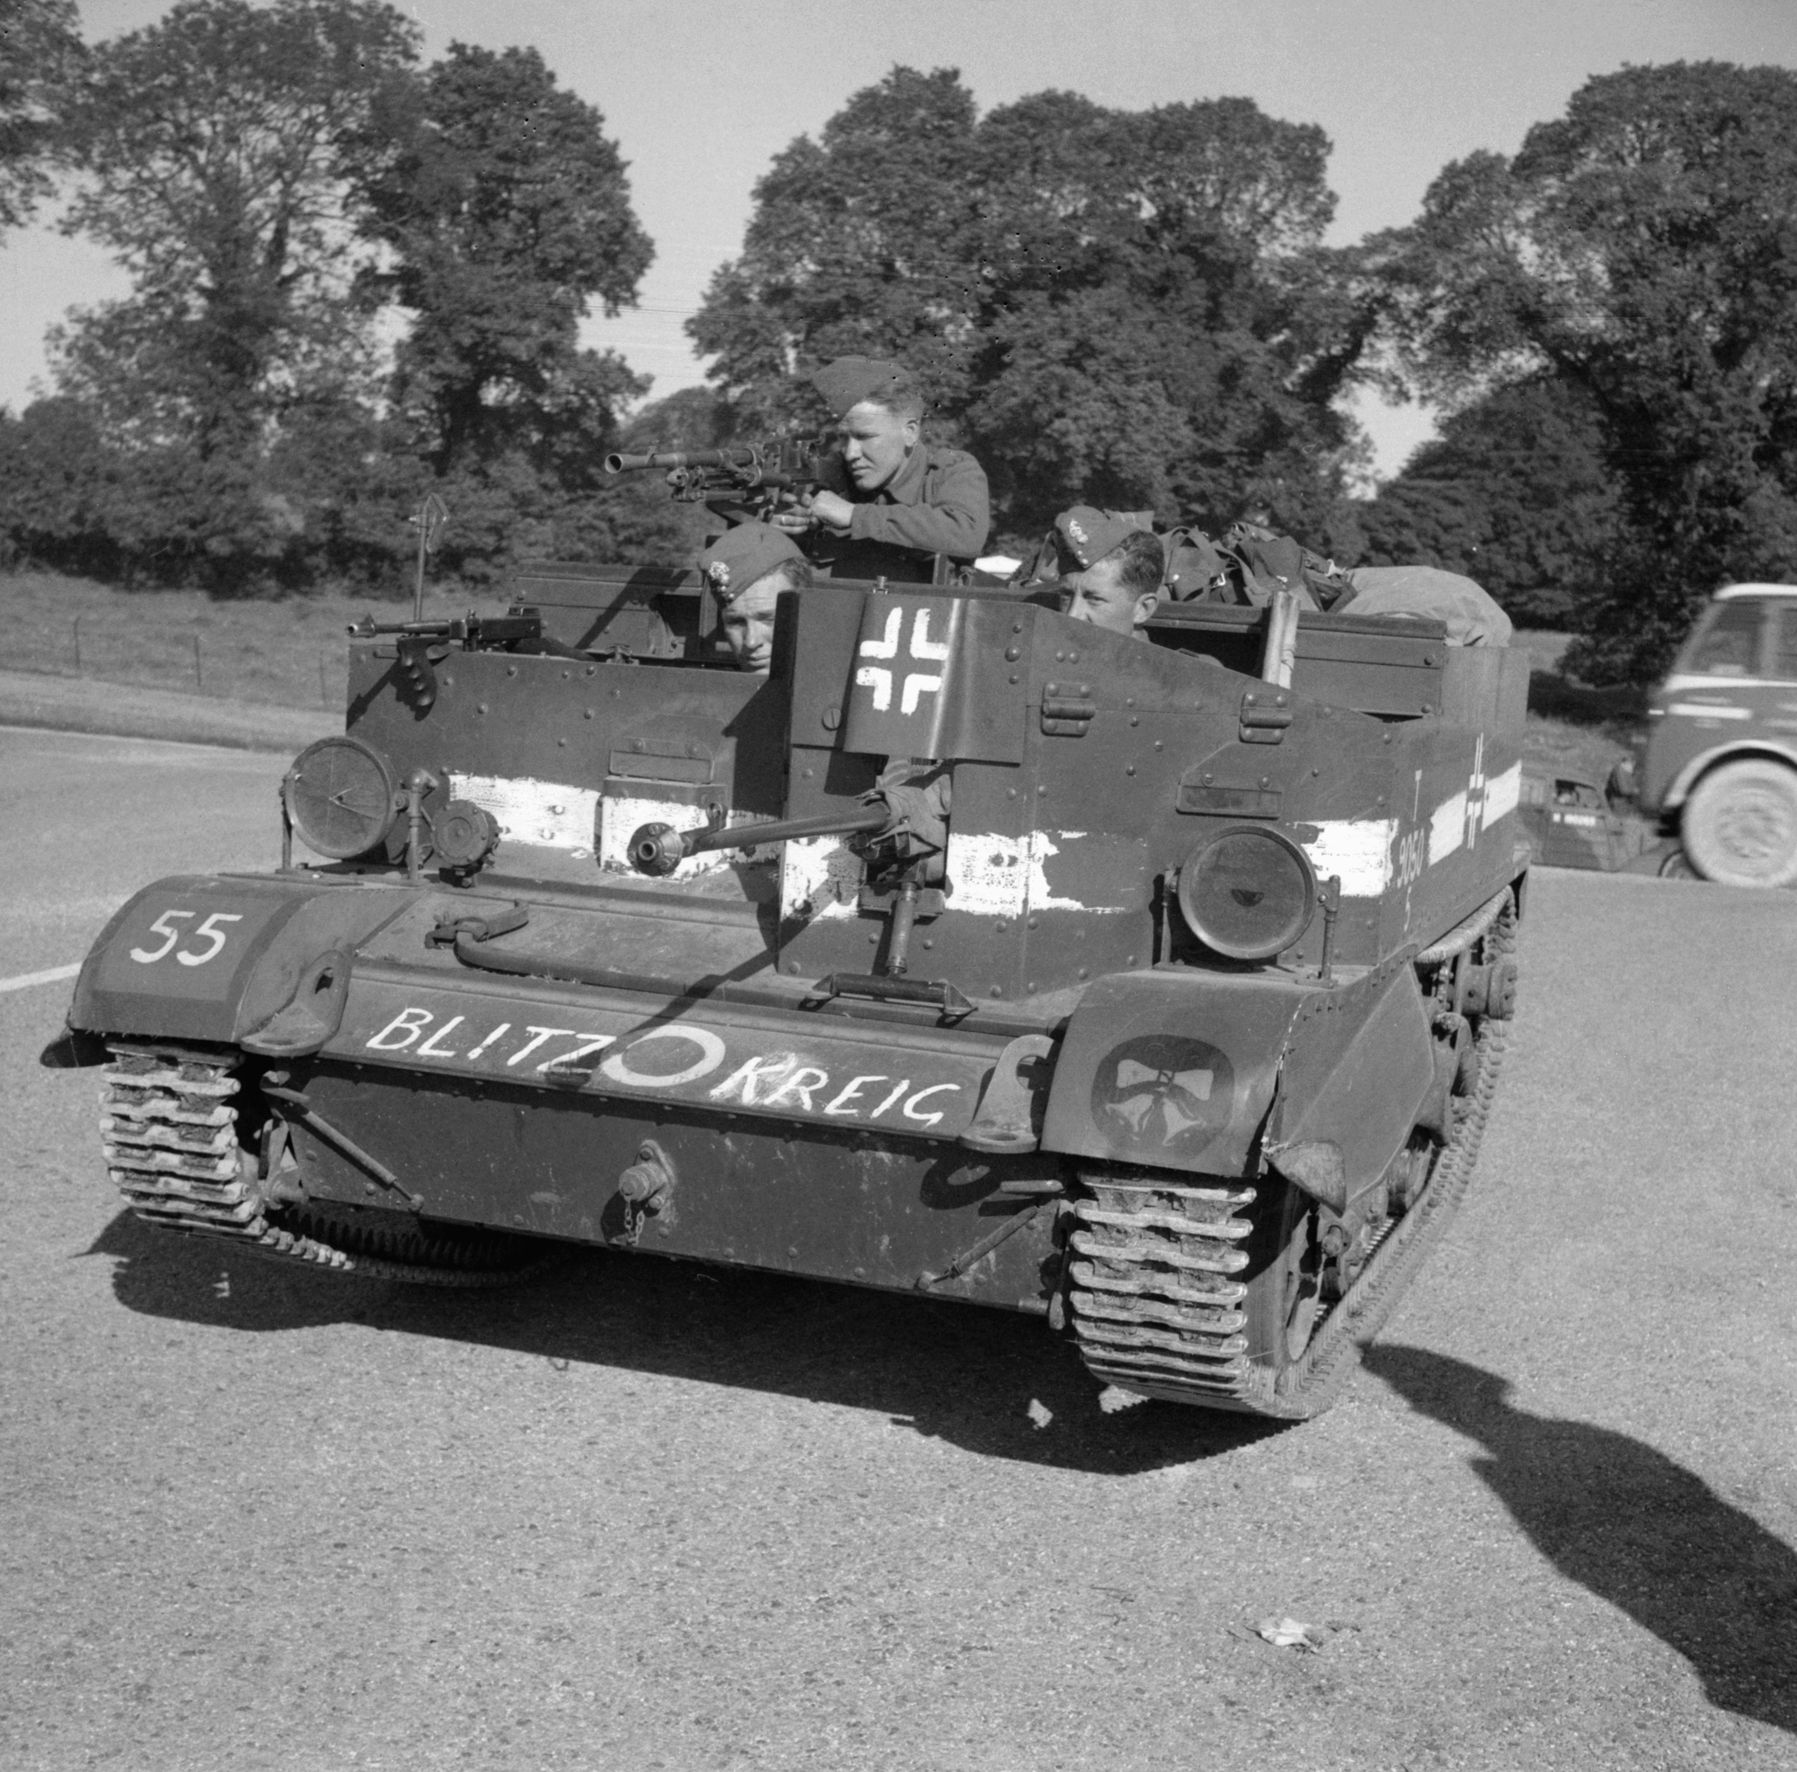 As the British engaged in an exercise in southern England in preparation for a potential German invasion in June 1941, this universal carrier, armed with a Boys antitank rifle, has been painted to represent a German armored vehicle. 